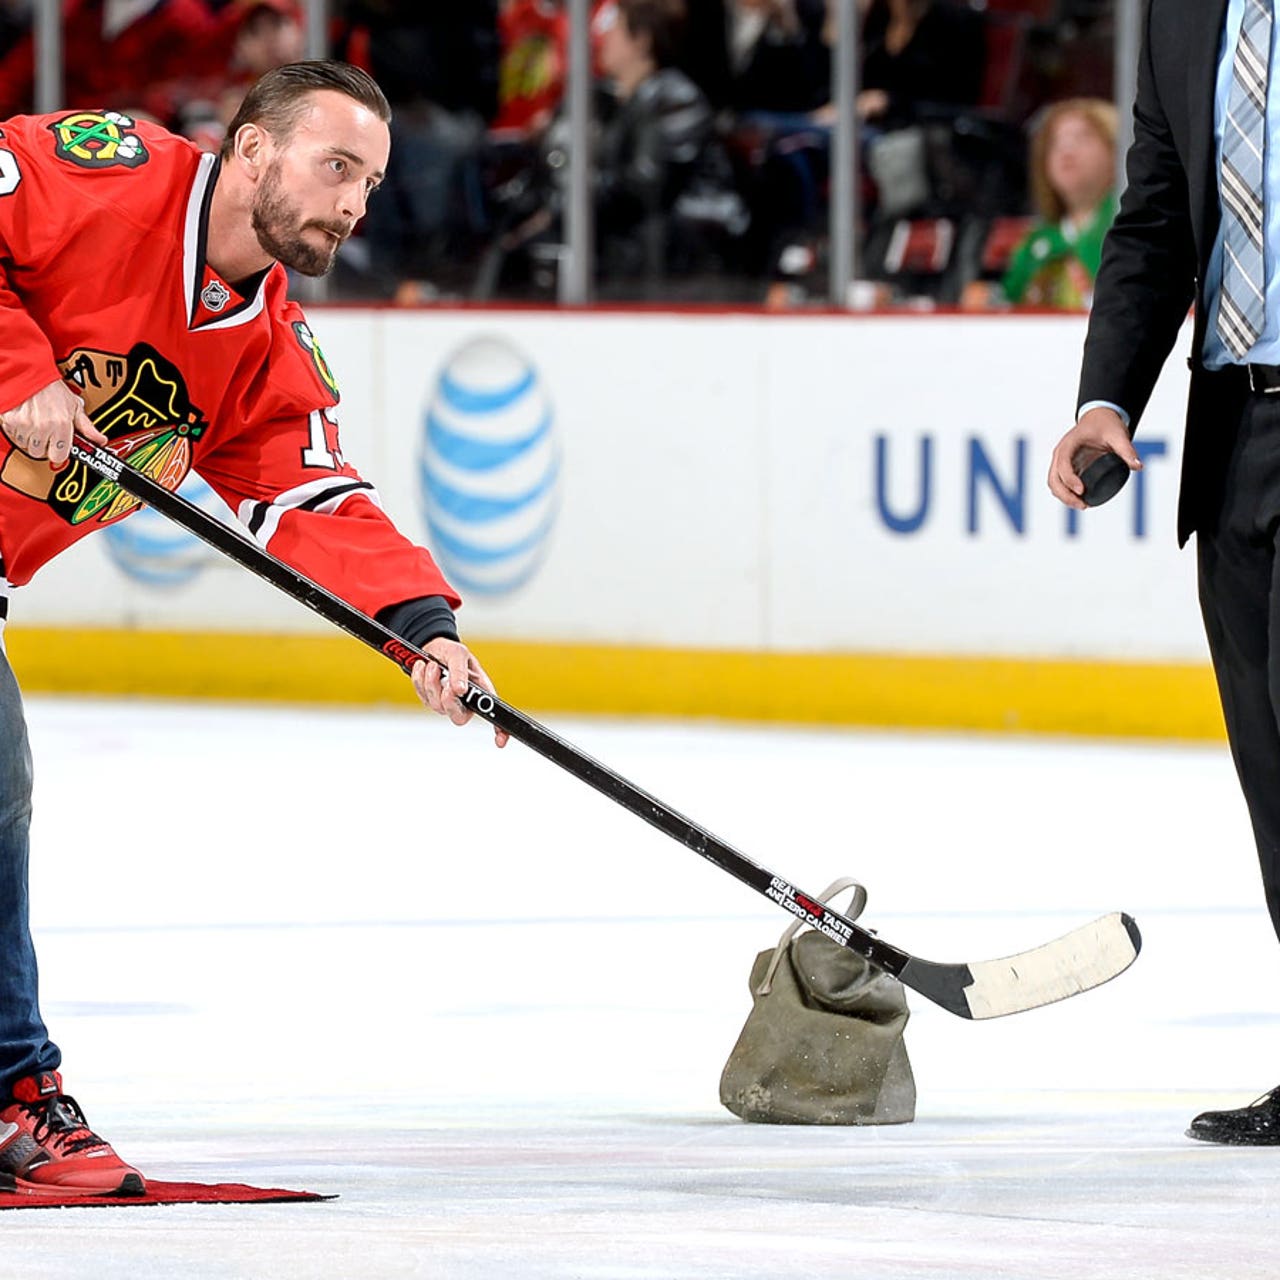 CM Punk at Chicago Blackhawks Game 7 could actually provide assist